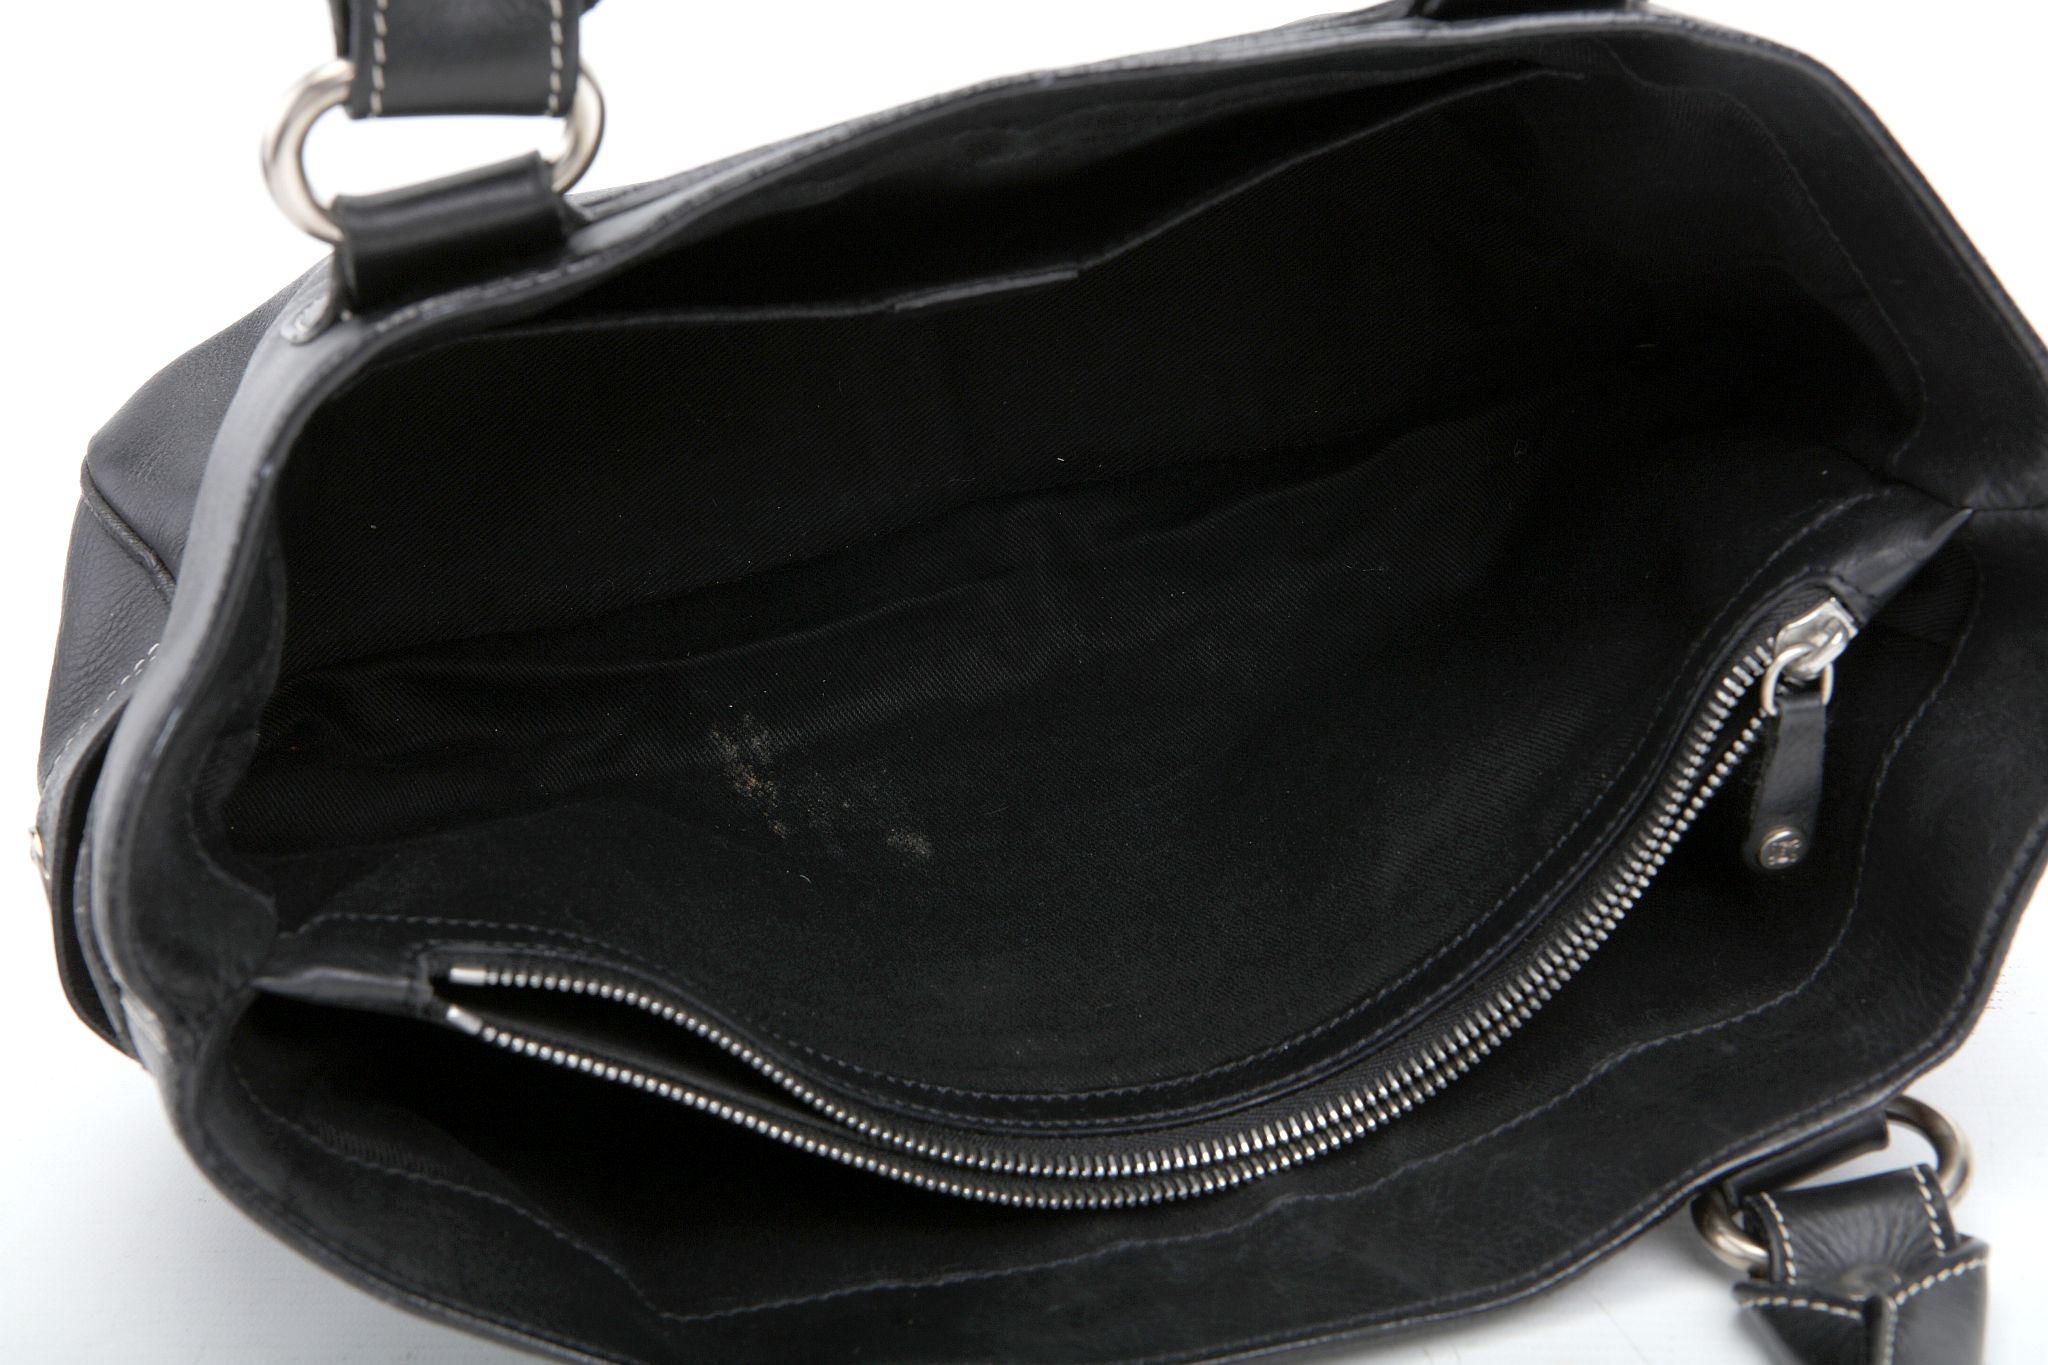 CELINE BOOGIE BAG, black leather with white stitching, 35cm wide, 30cm high, with dust bag - Image 10 of 12